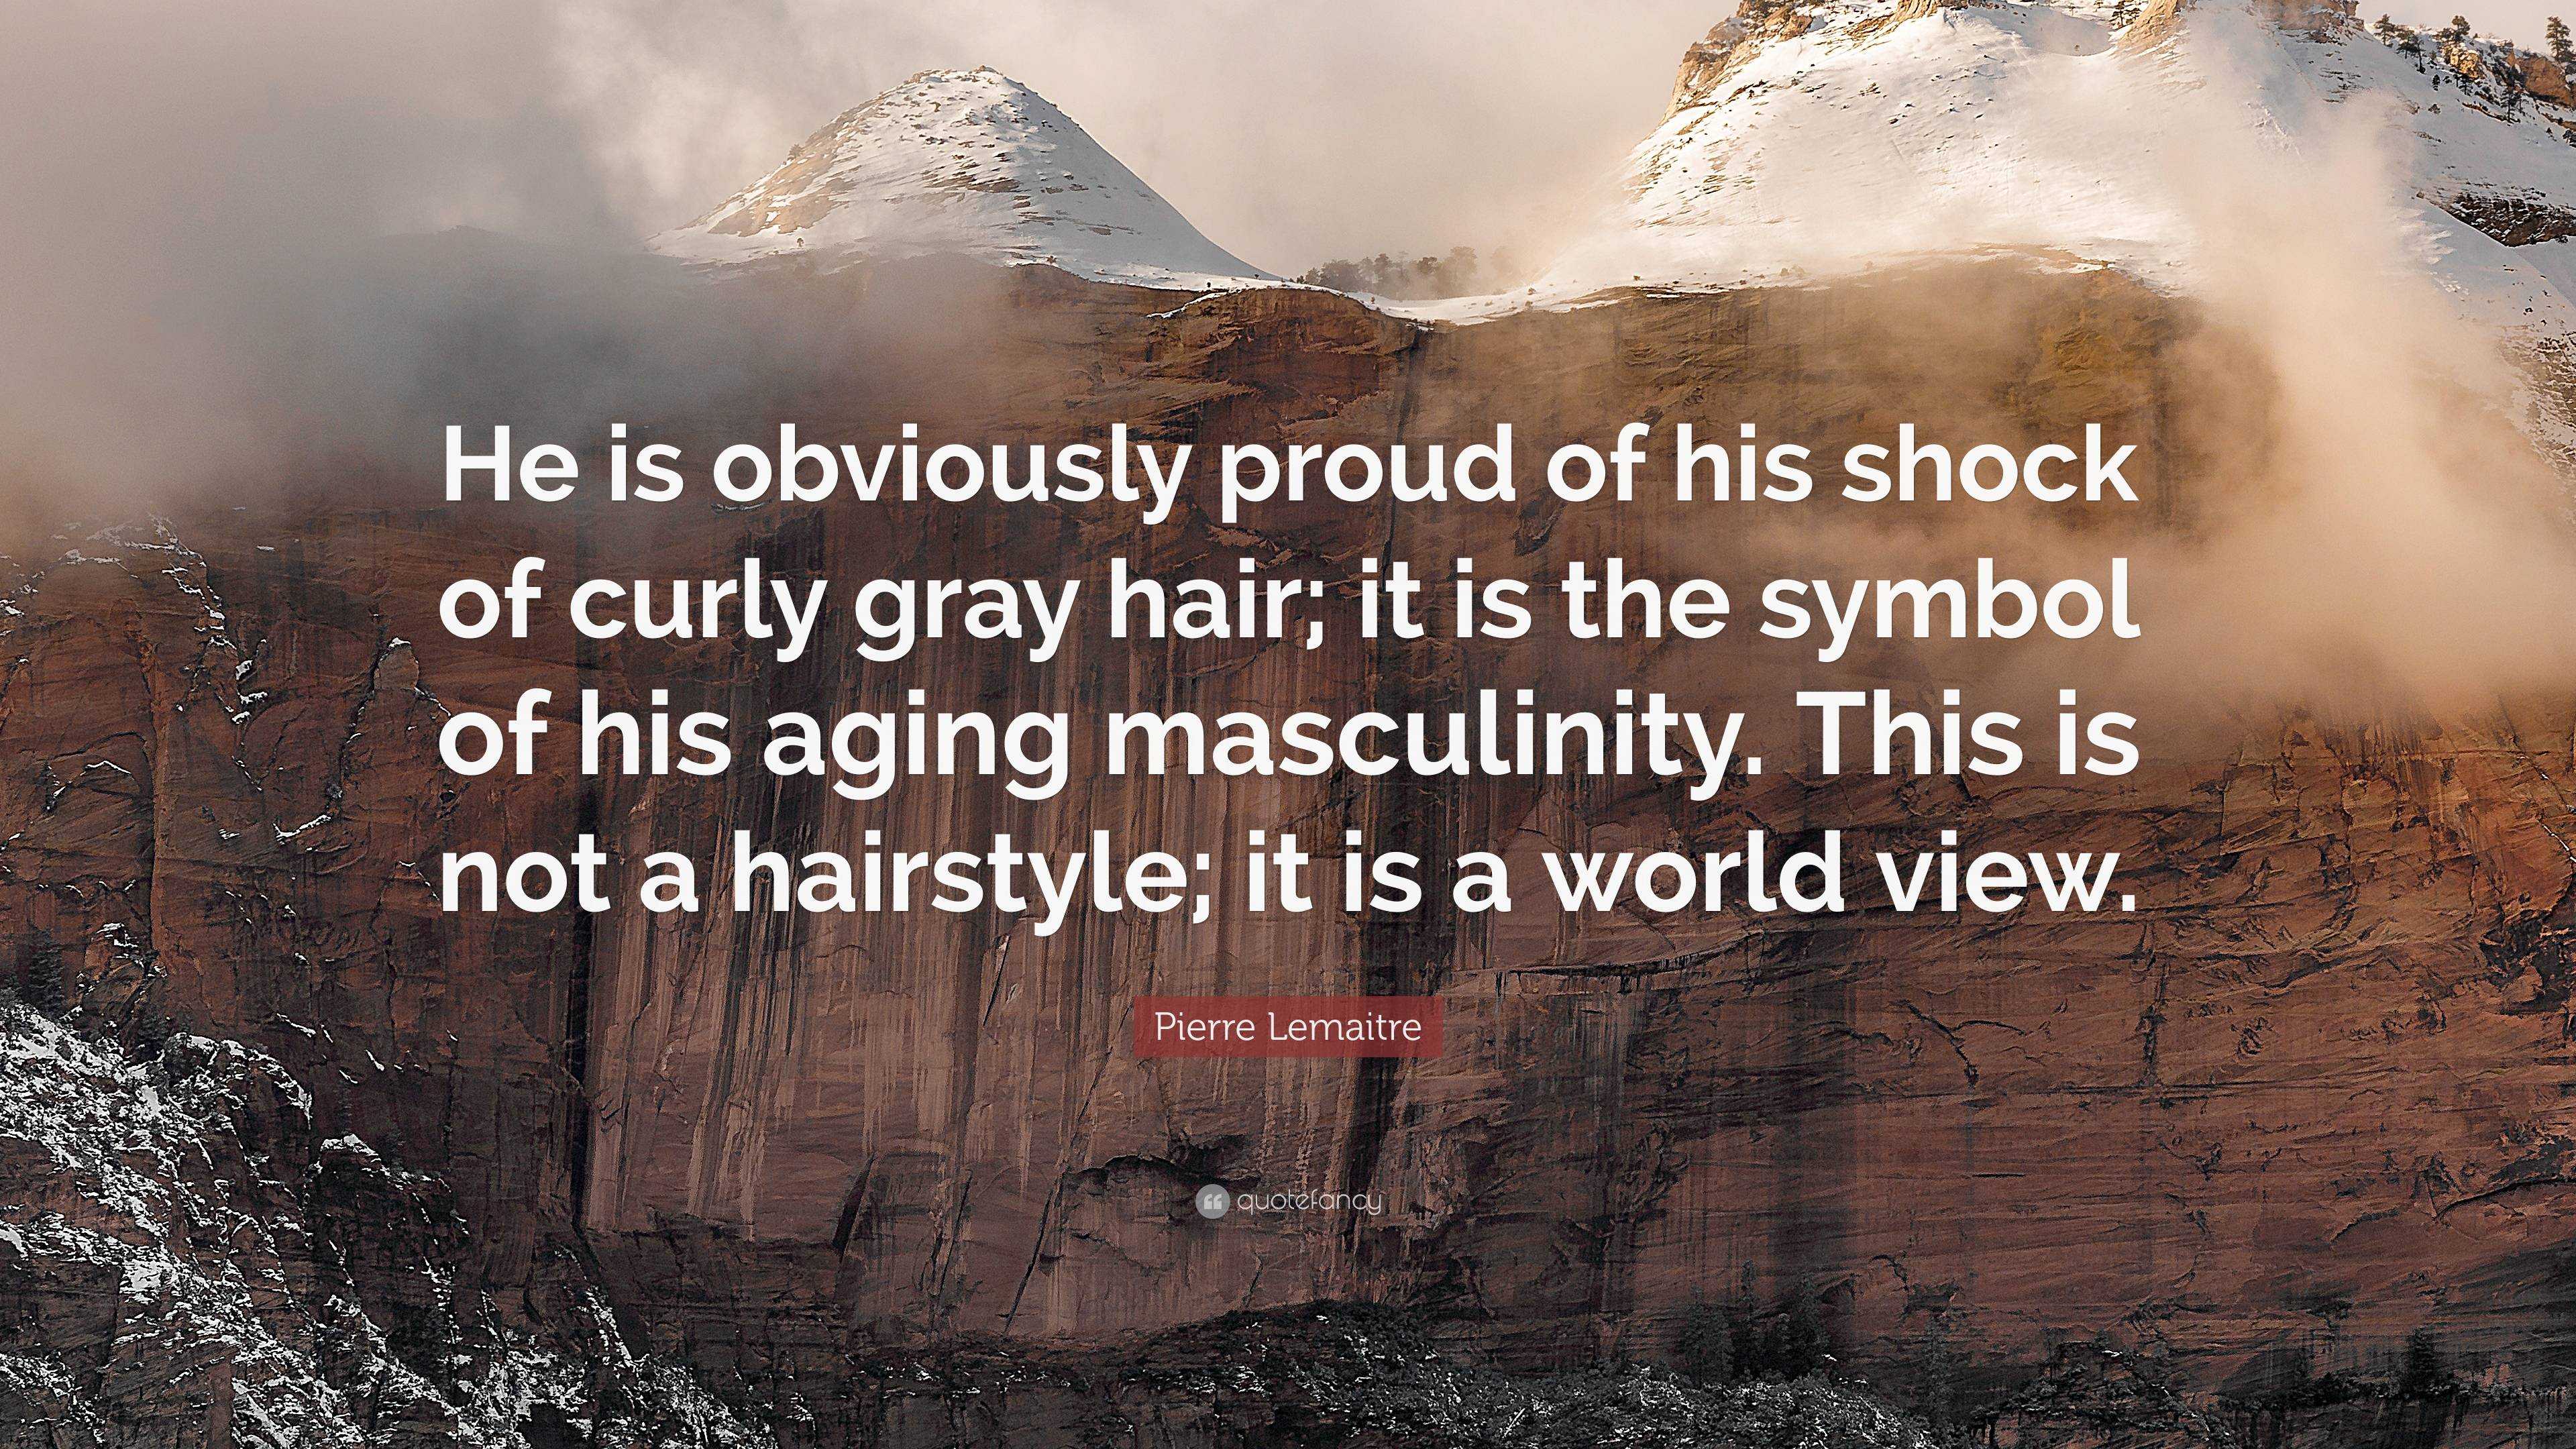 Pierre Lemaitre Quote: “He is obviously proud of his shock of curly gray  hair; it is the symbol of his aging masculinity. This is not a hairstyl...”